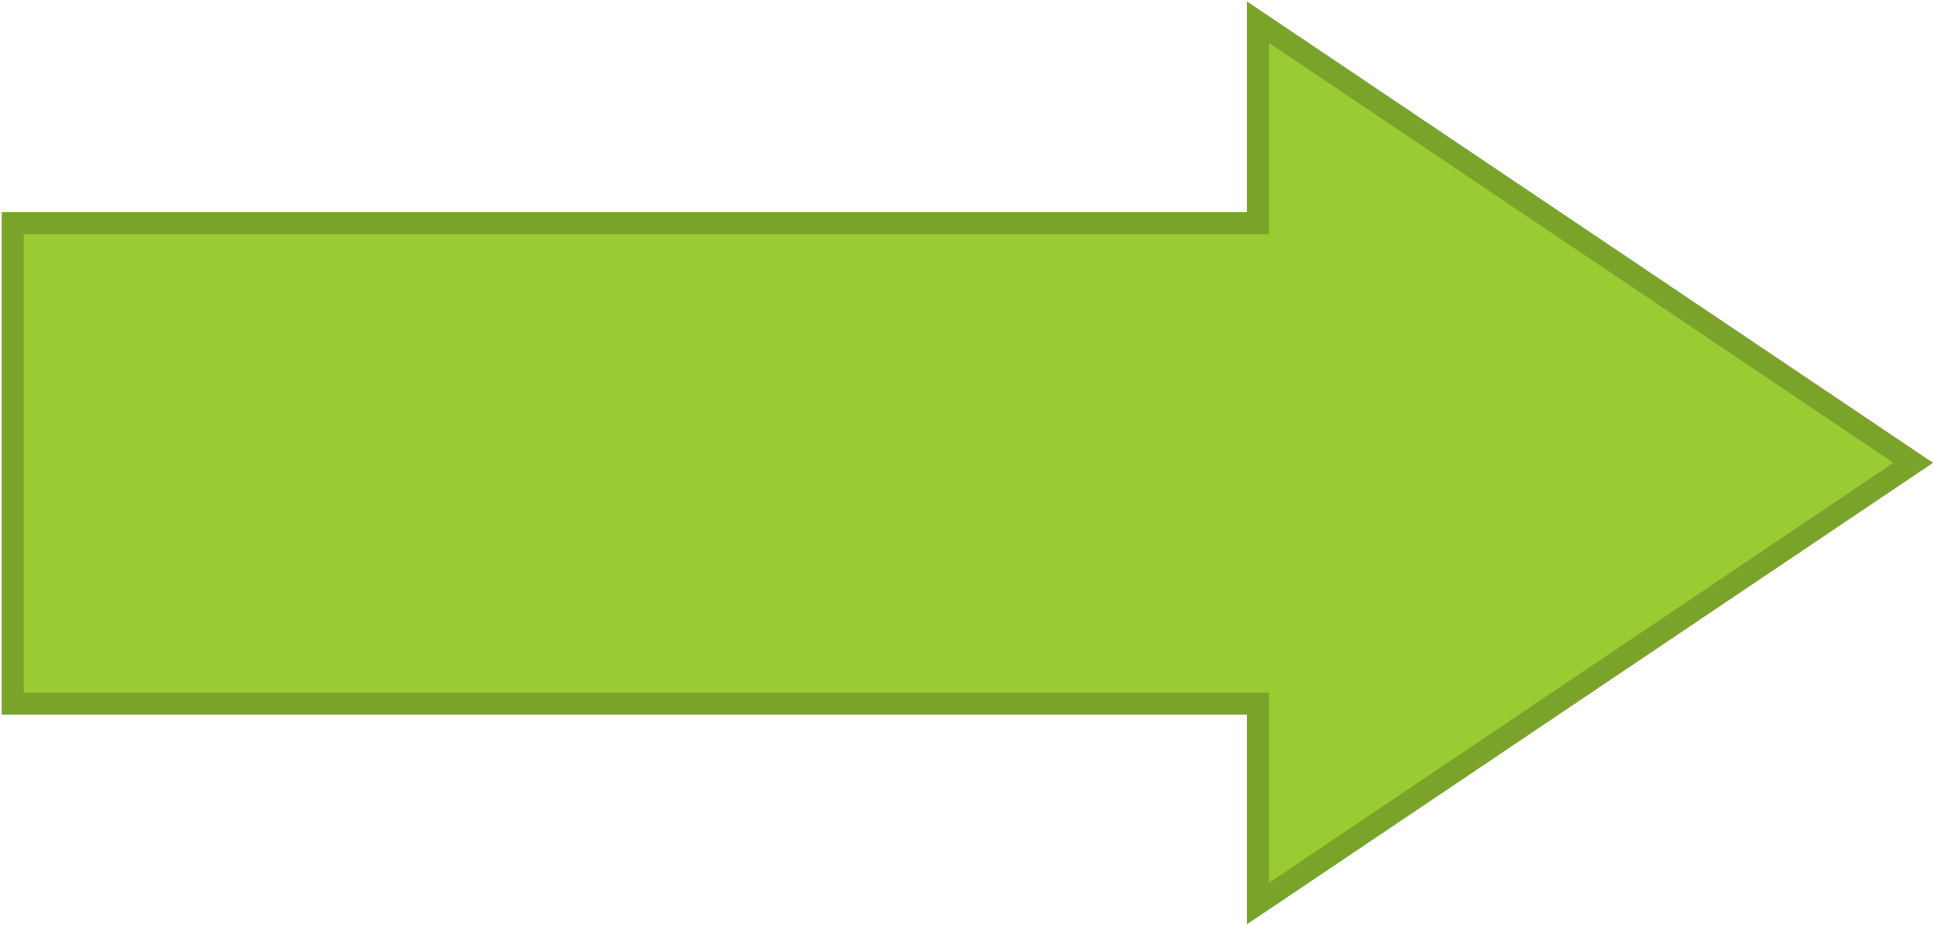 Open - Green Arrow To The Left (2000x994)